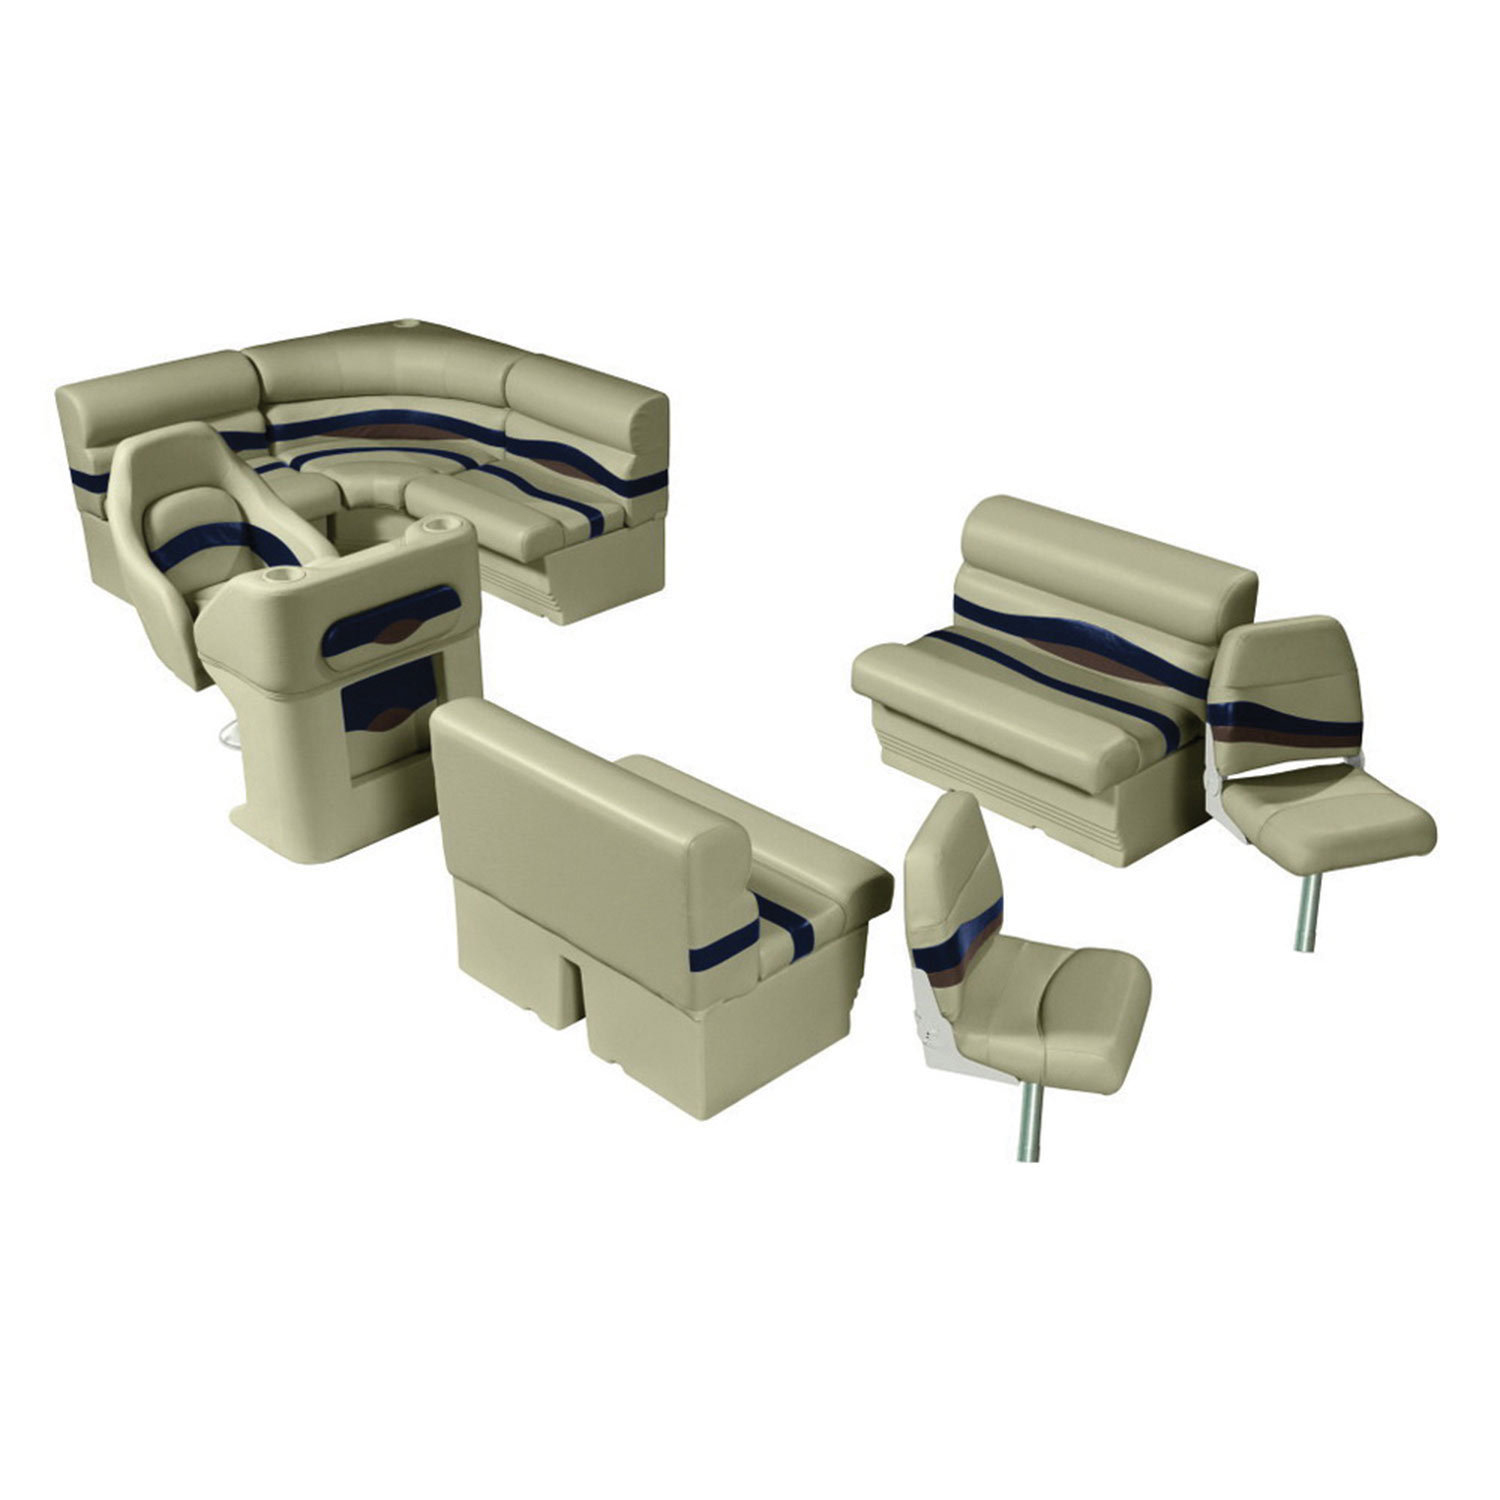 WISE SEATING 8' Premier Angler Pontoon Boat Seat Package